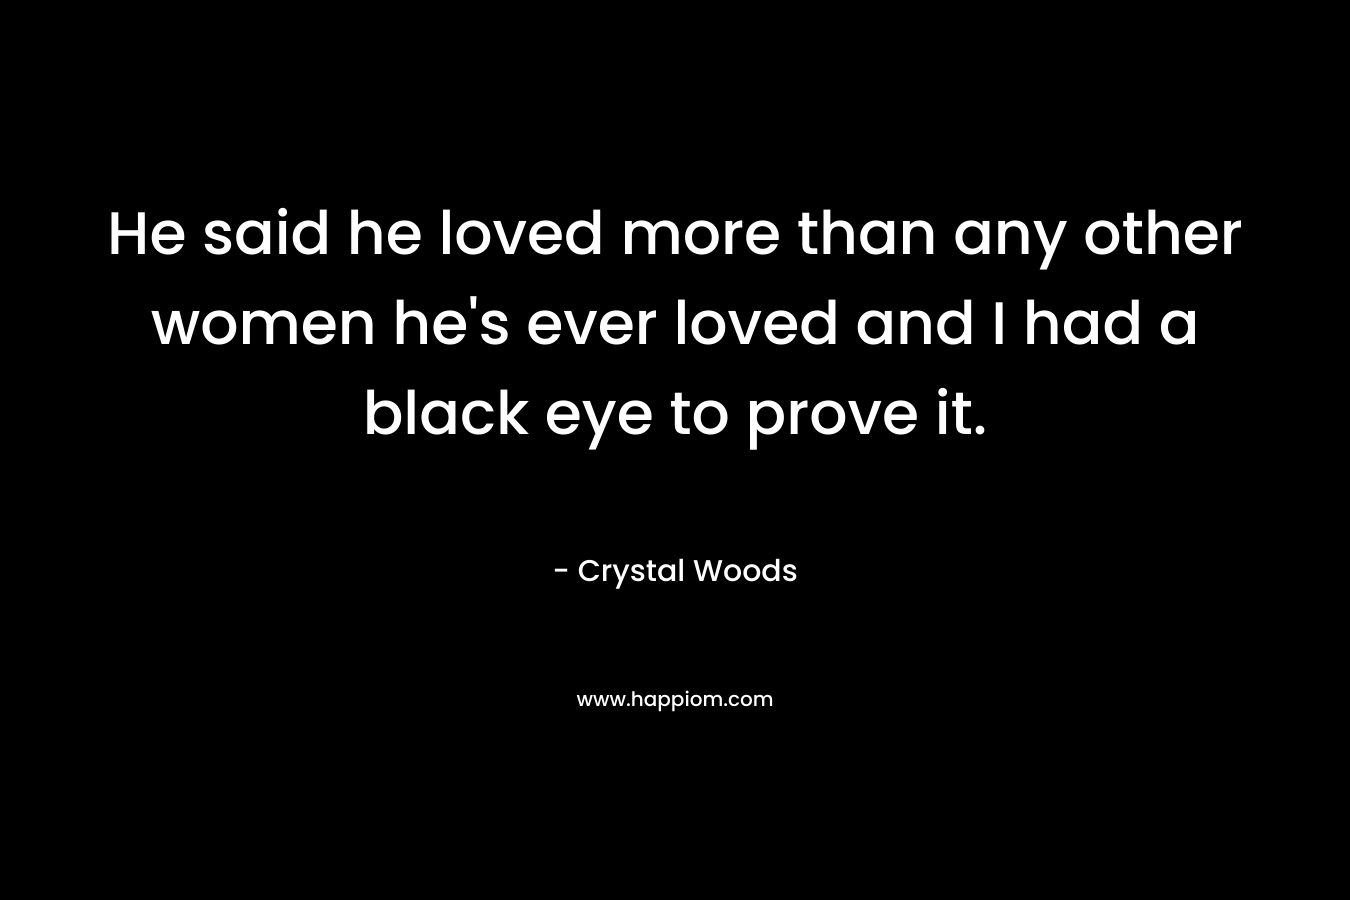 He said he loved more than any other women he's ever loved and I had a black eye to prove it.